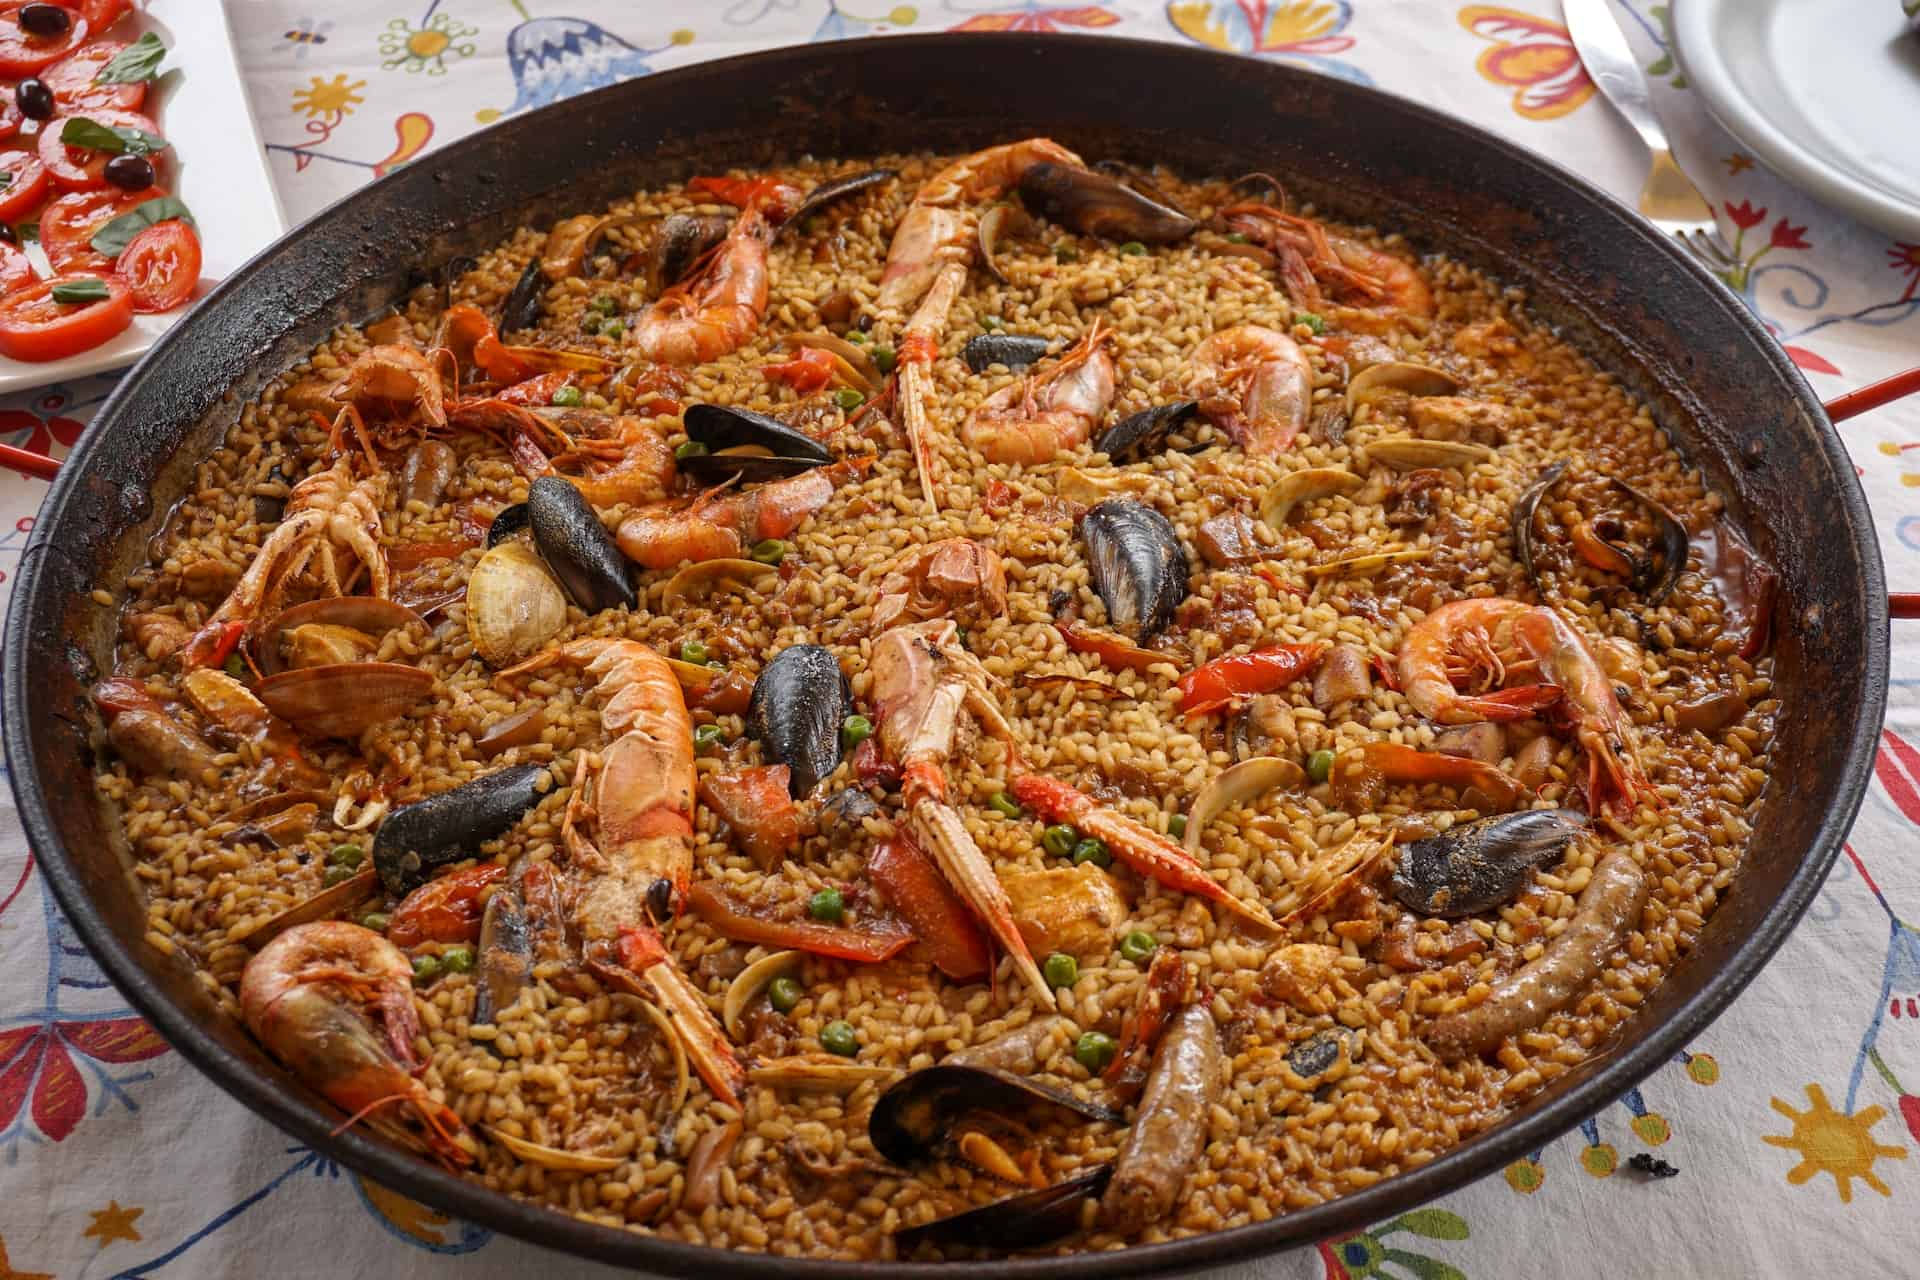 Large pan of paella sitting on a table.